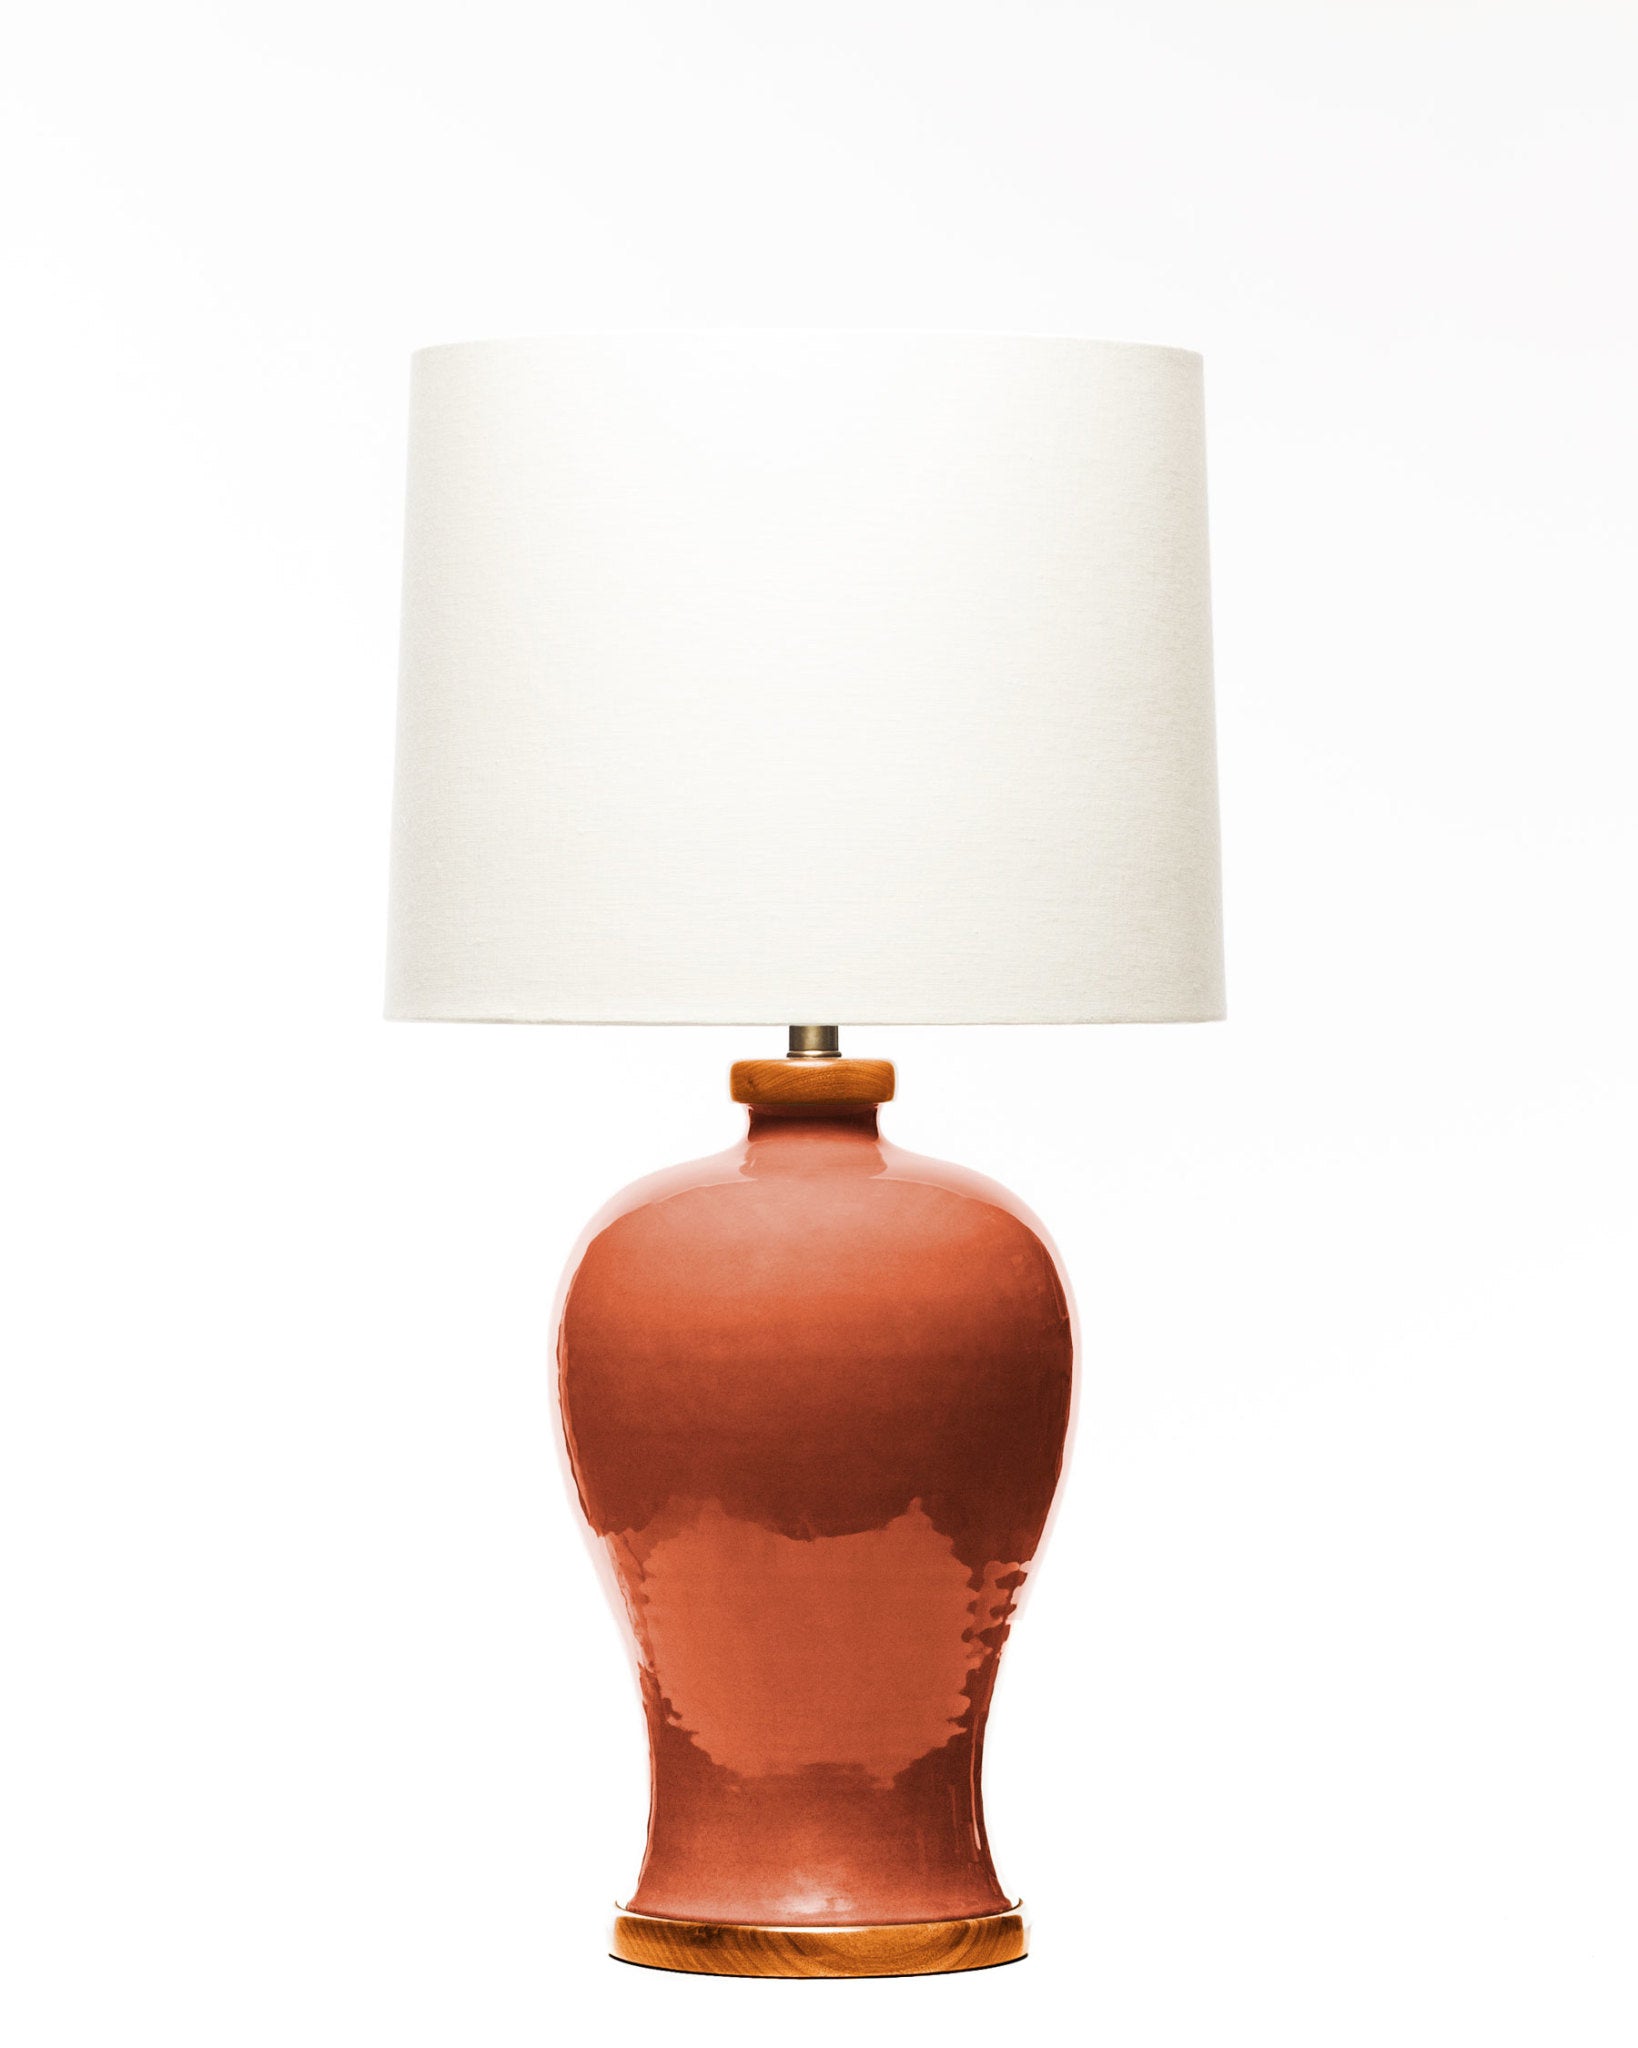 Lawrence & Scott Dashiell Porcelain Desk Lamp in Living Coral with Sapele Base